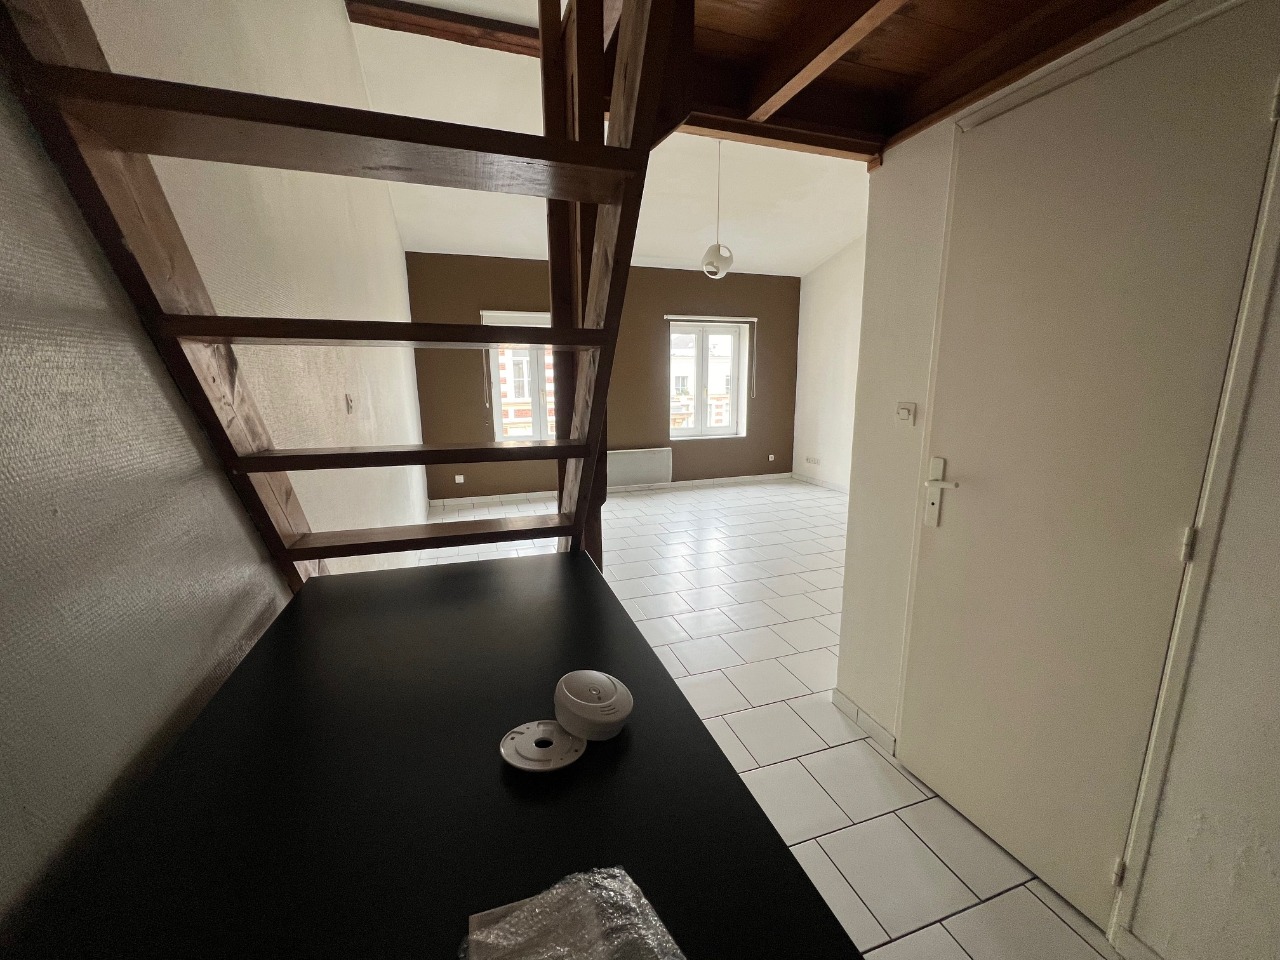 Appartement type 1 bis lille Photo 10 - JLW Immobilier